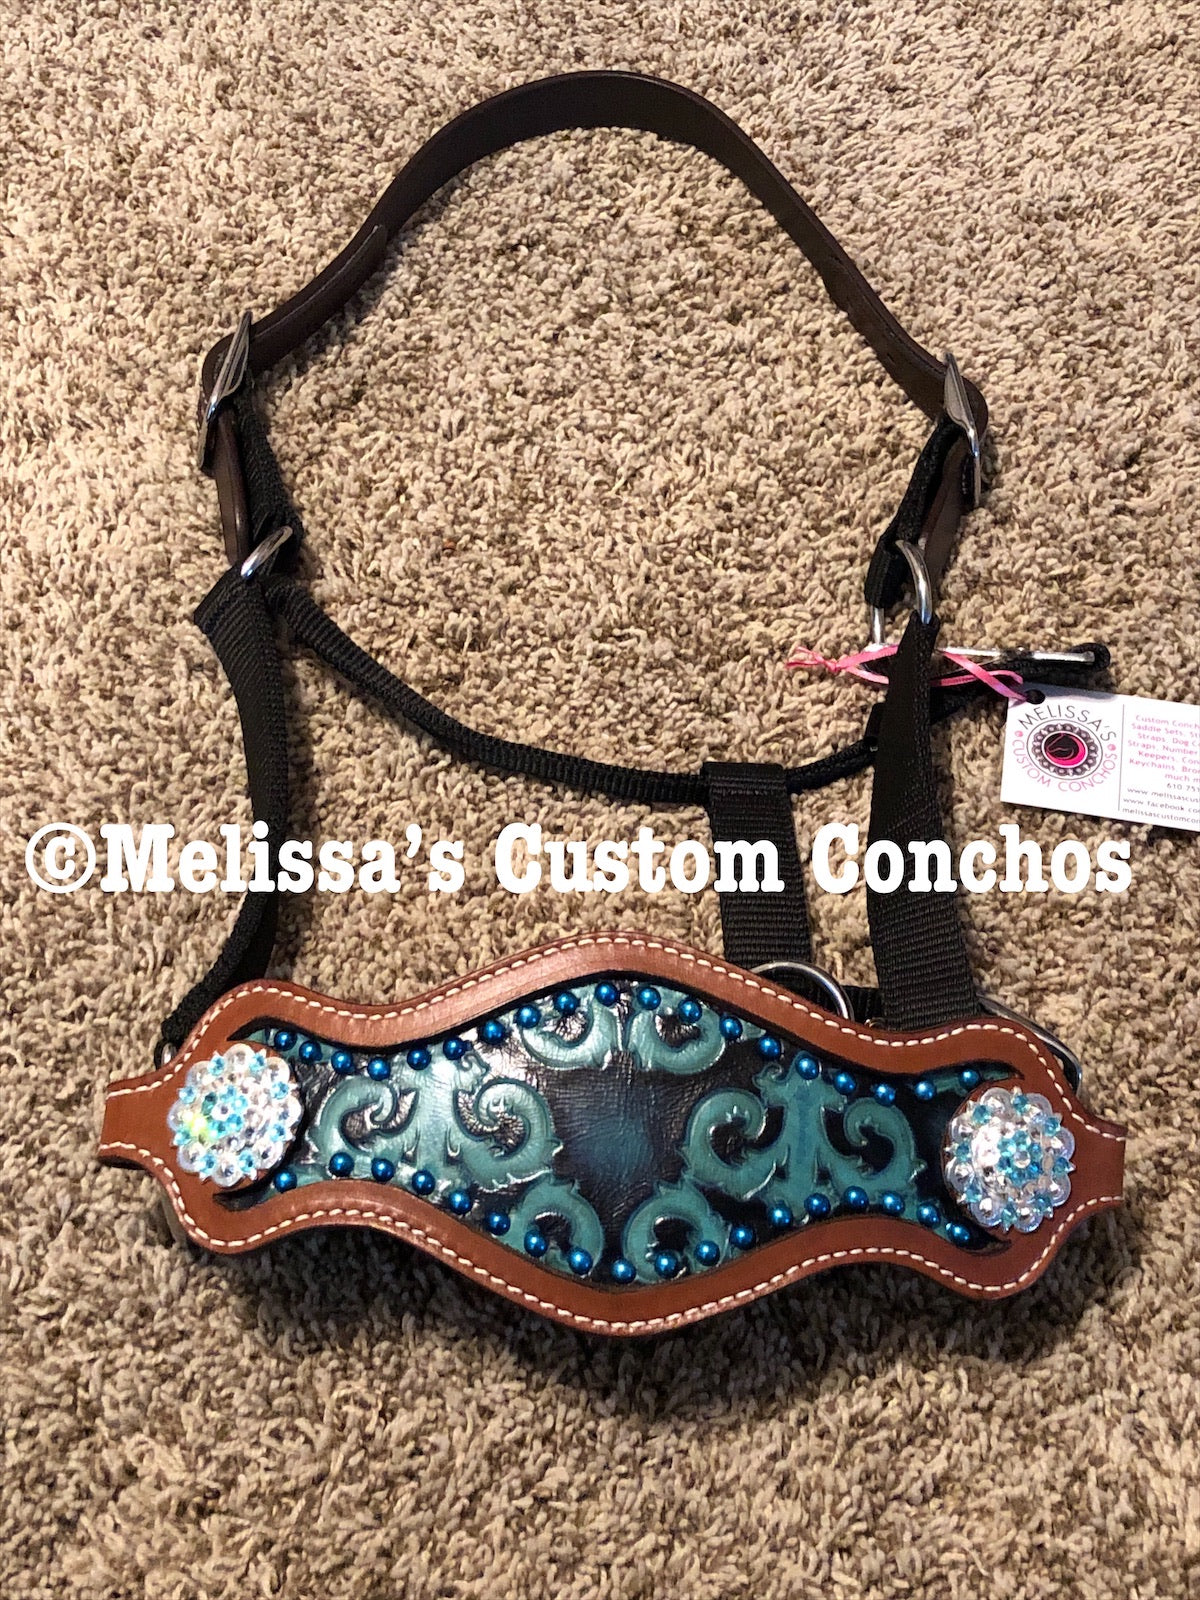 Turquoise Scroll Bronc Halter – Twisted T Tack